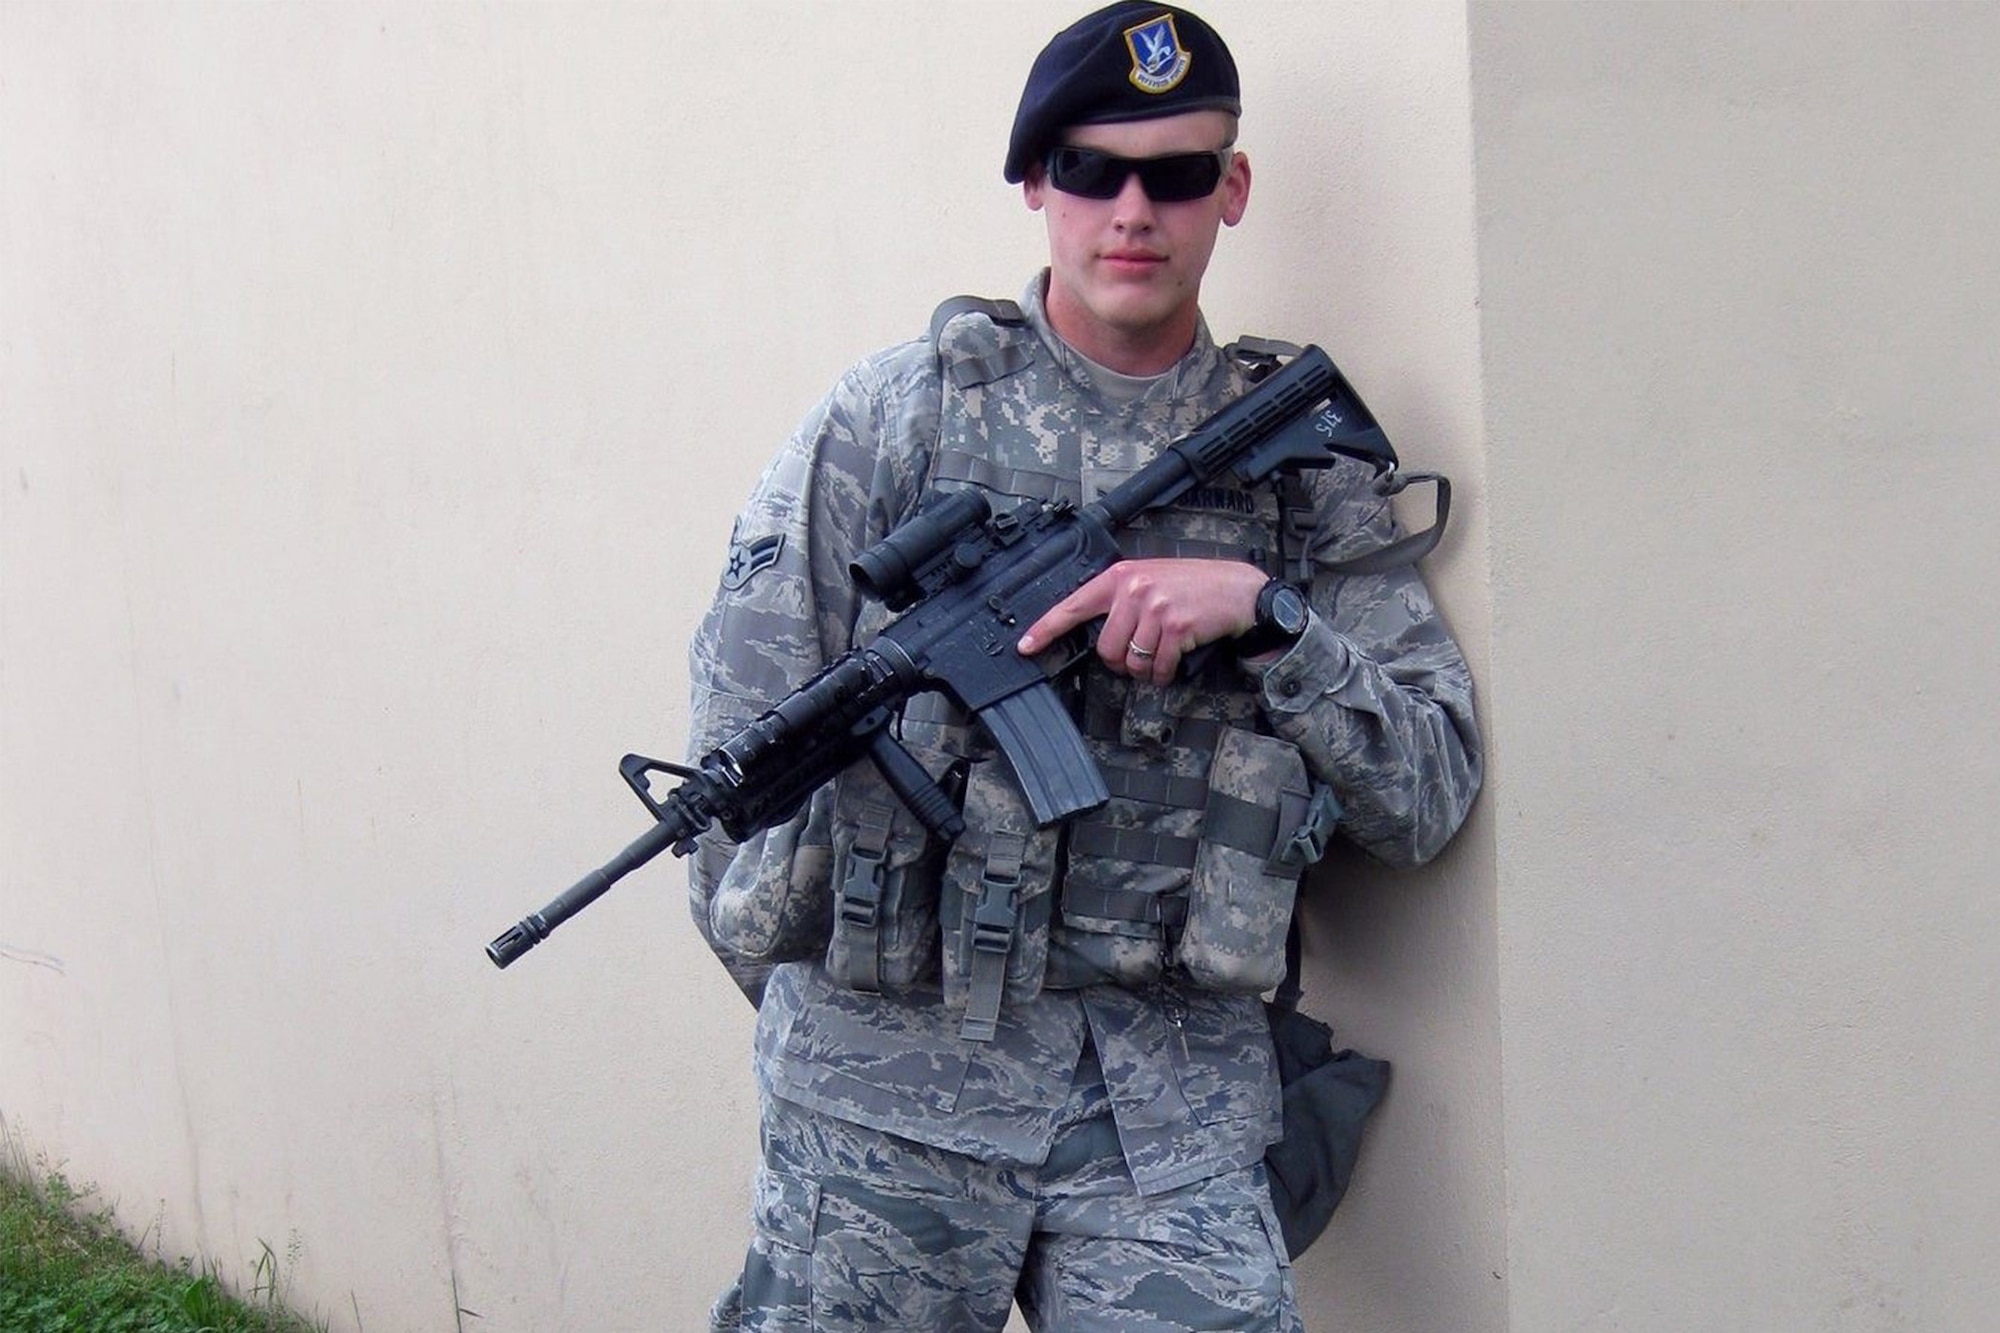 Then Airman 1st Class Clay Barnard, formerly a security forces member, poses for a photo.